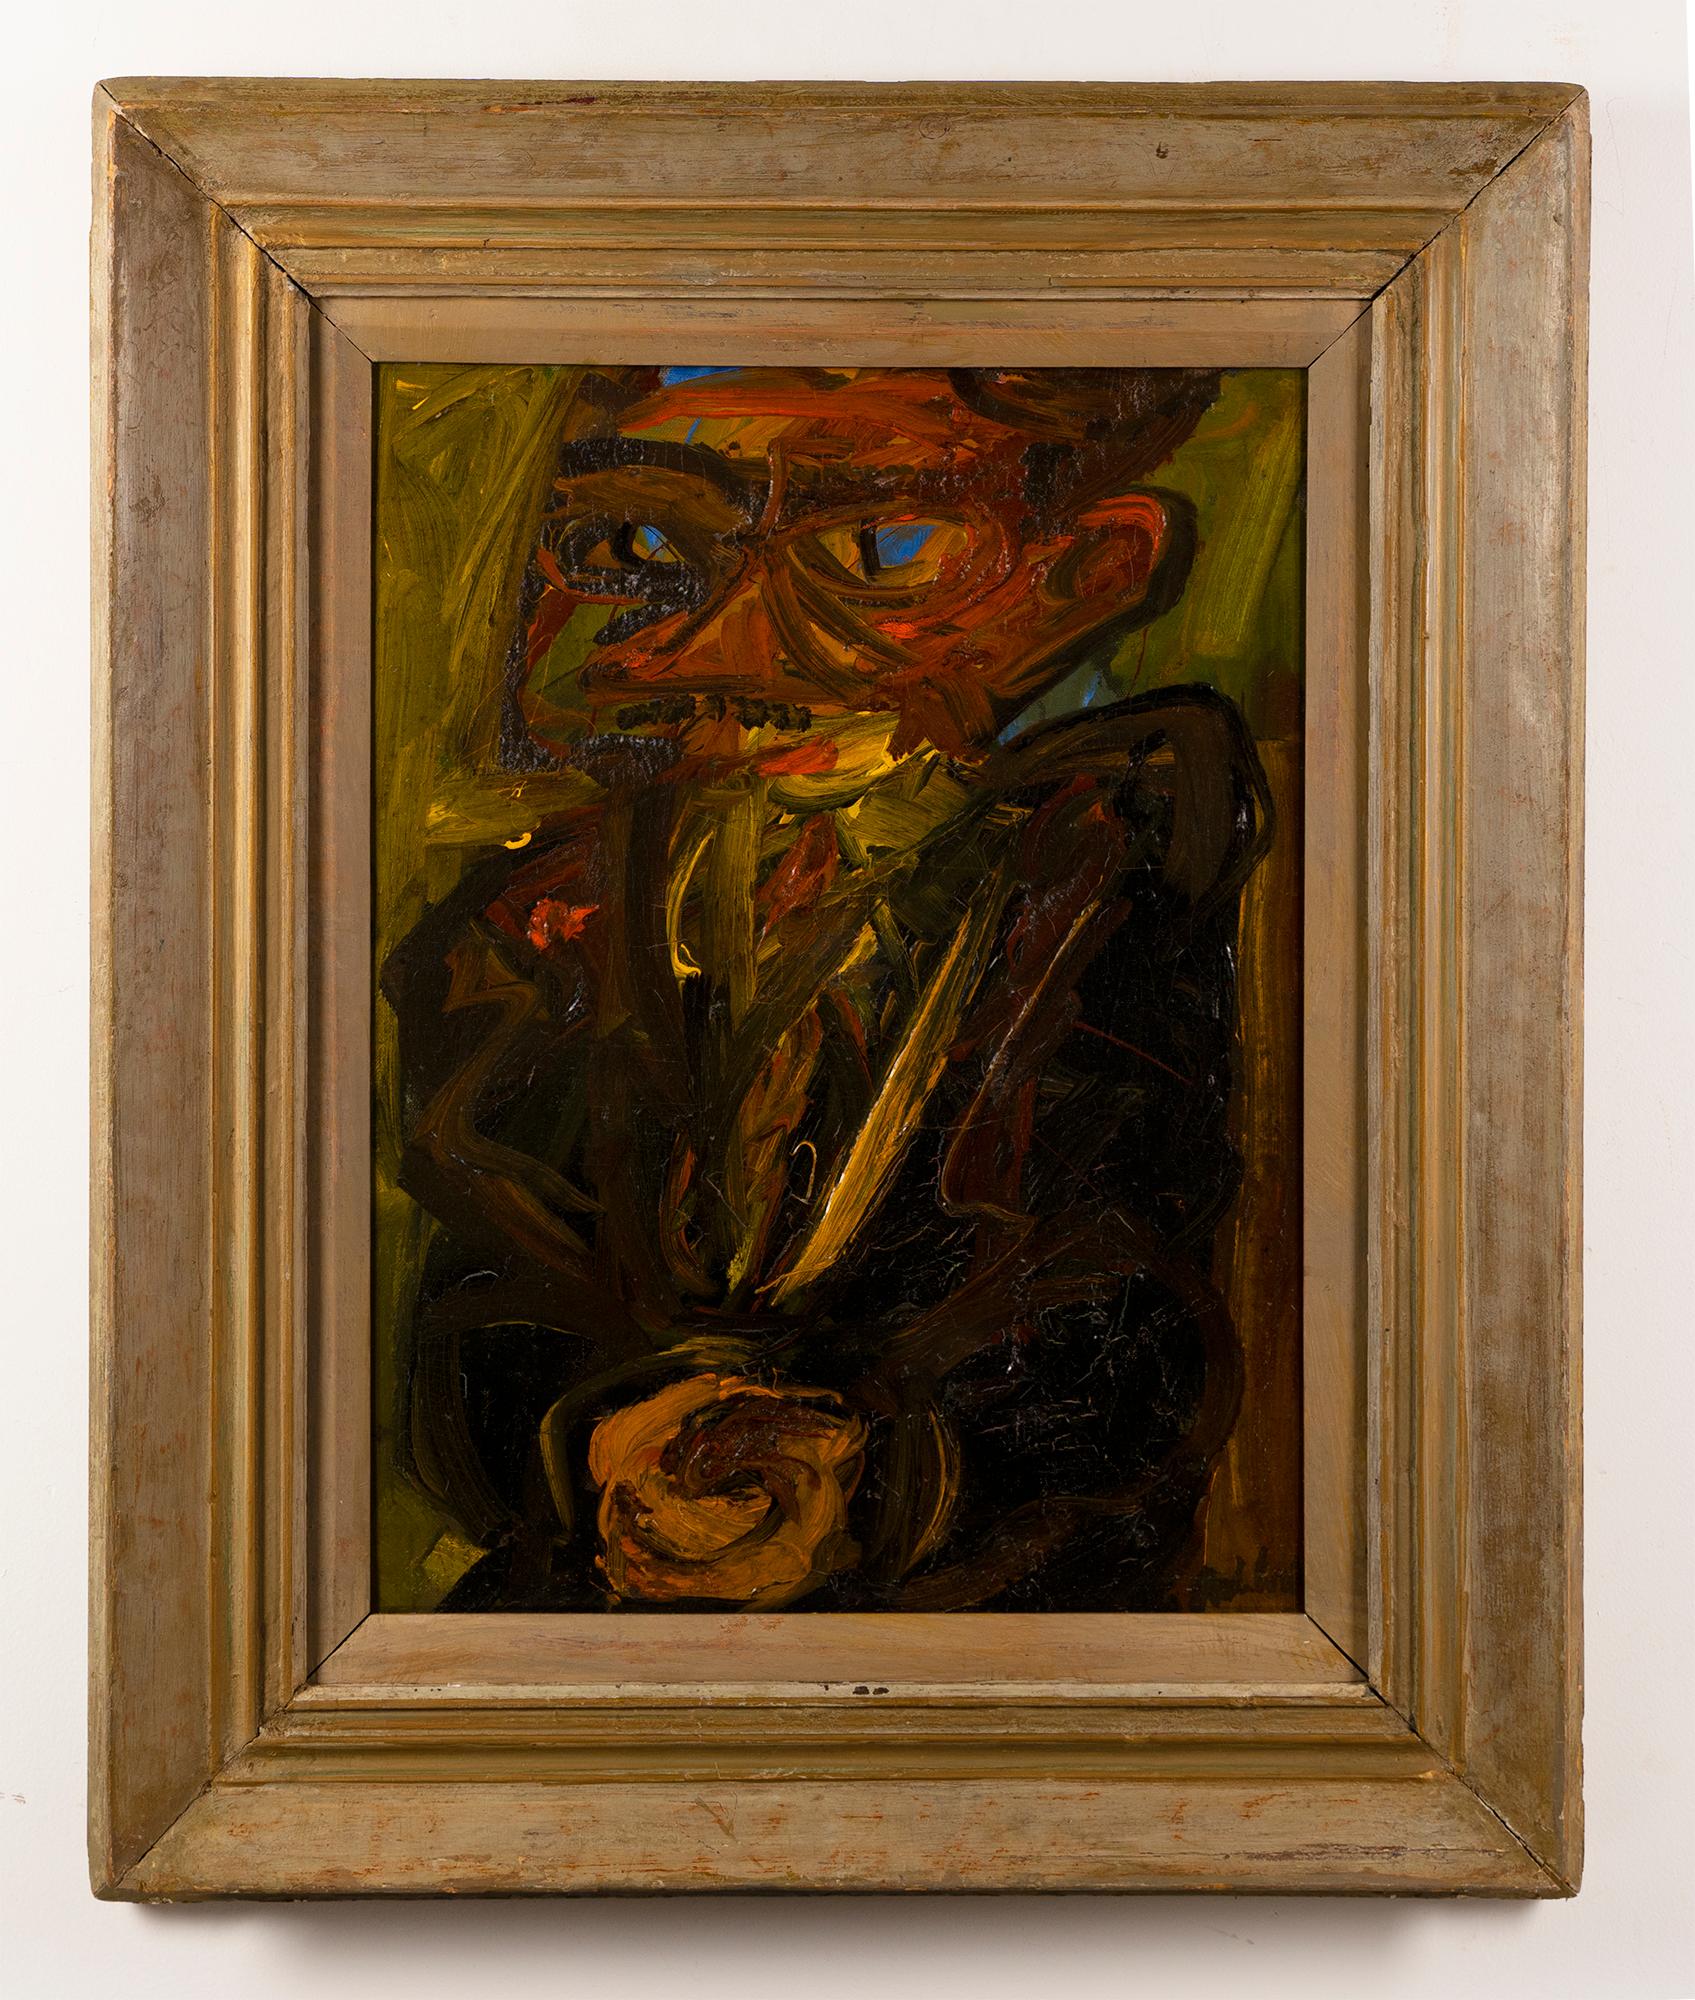 Vintage American modernist portrait oil painting by Rex Jesse Ashlock (1918 - 1999).  Oil on board, circa 1956.  Signed.  Image size, 18L x 24H.  Housed in a period wood frame.